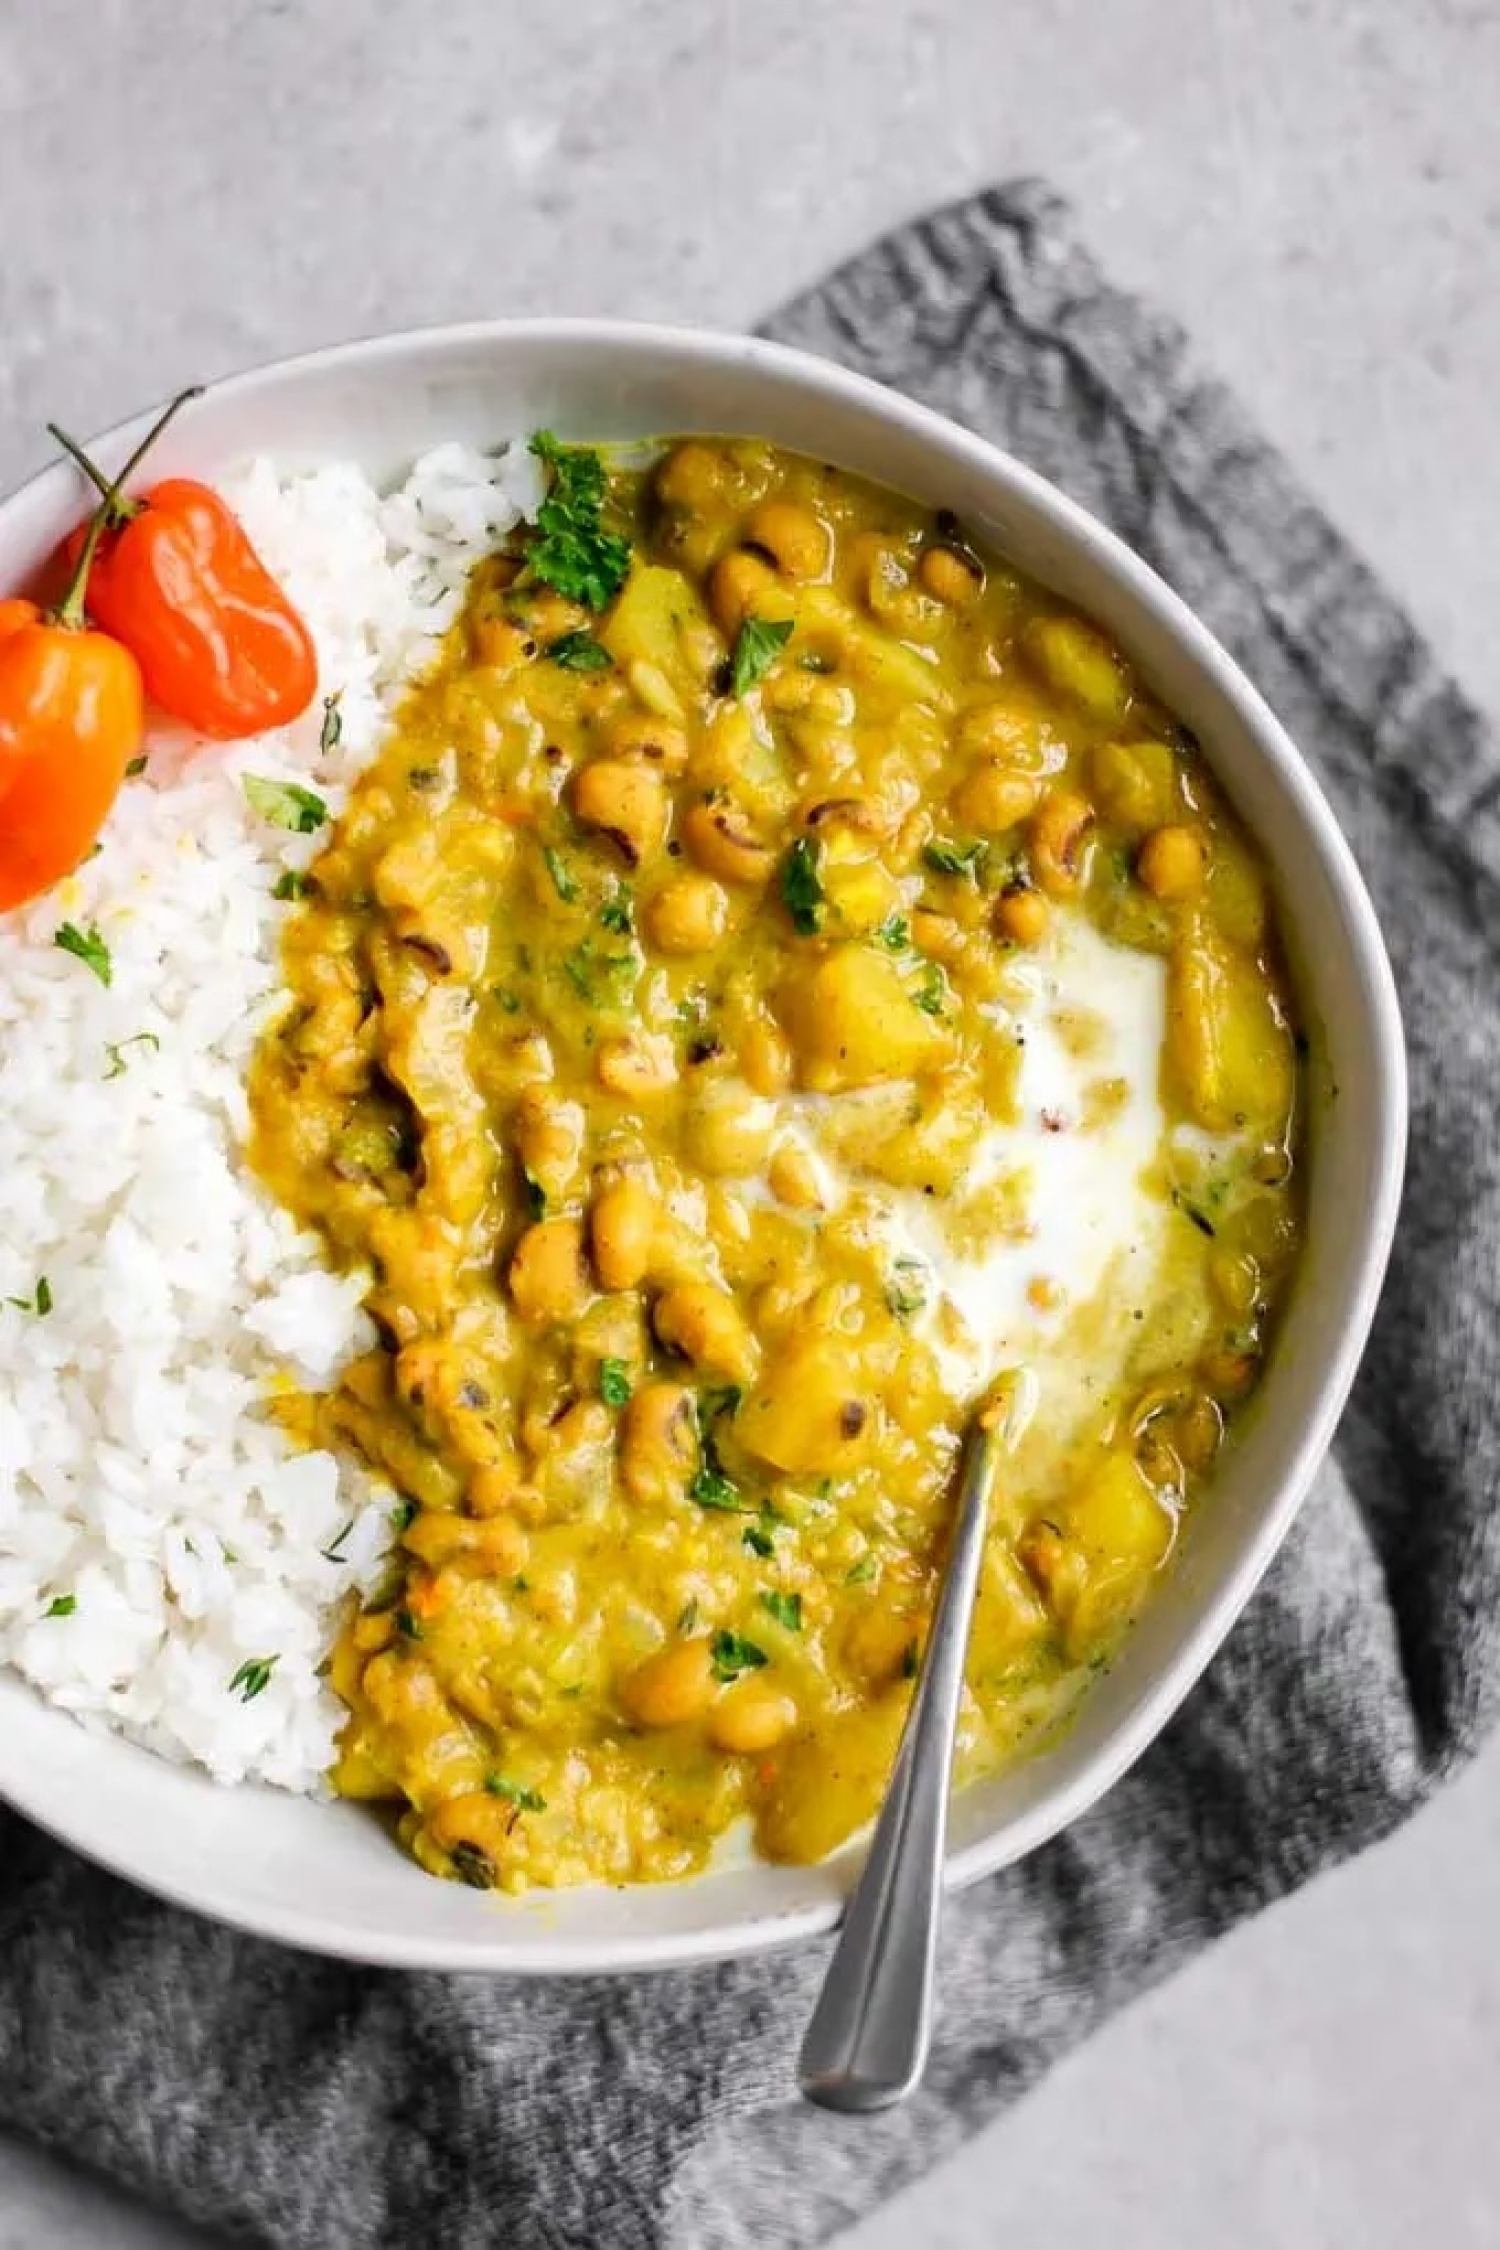 <p>This spicy, savory Jamaican curry uses canned black-eyed peas with a homemade seasoning that's worth the effort to make from scratch. Paired with buttery yukon gold potatoes and kicked up with scotch bonnet peppers, it's easily adaptable to your spice tolerance. <a href="https://www.thecuriouschickpea.com/jamaican-black-eyed-pea-curry/" rel="noopener">Get the recipe here.</a></p>